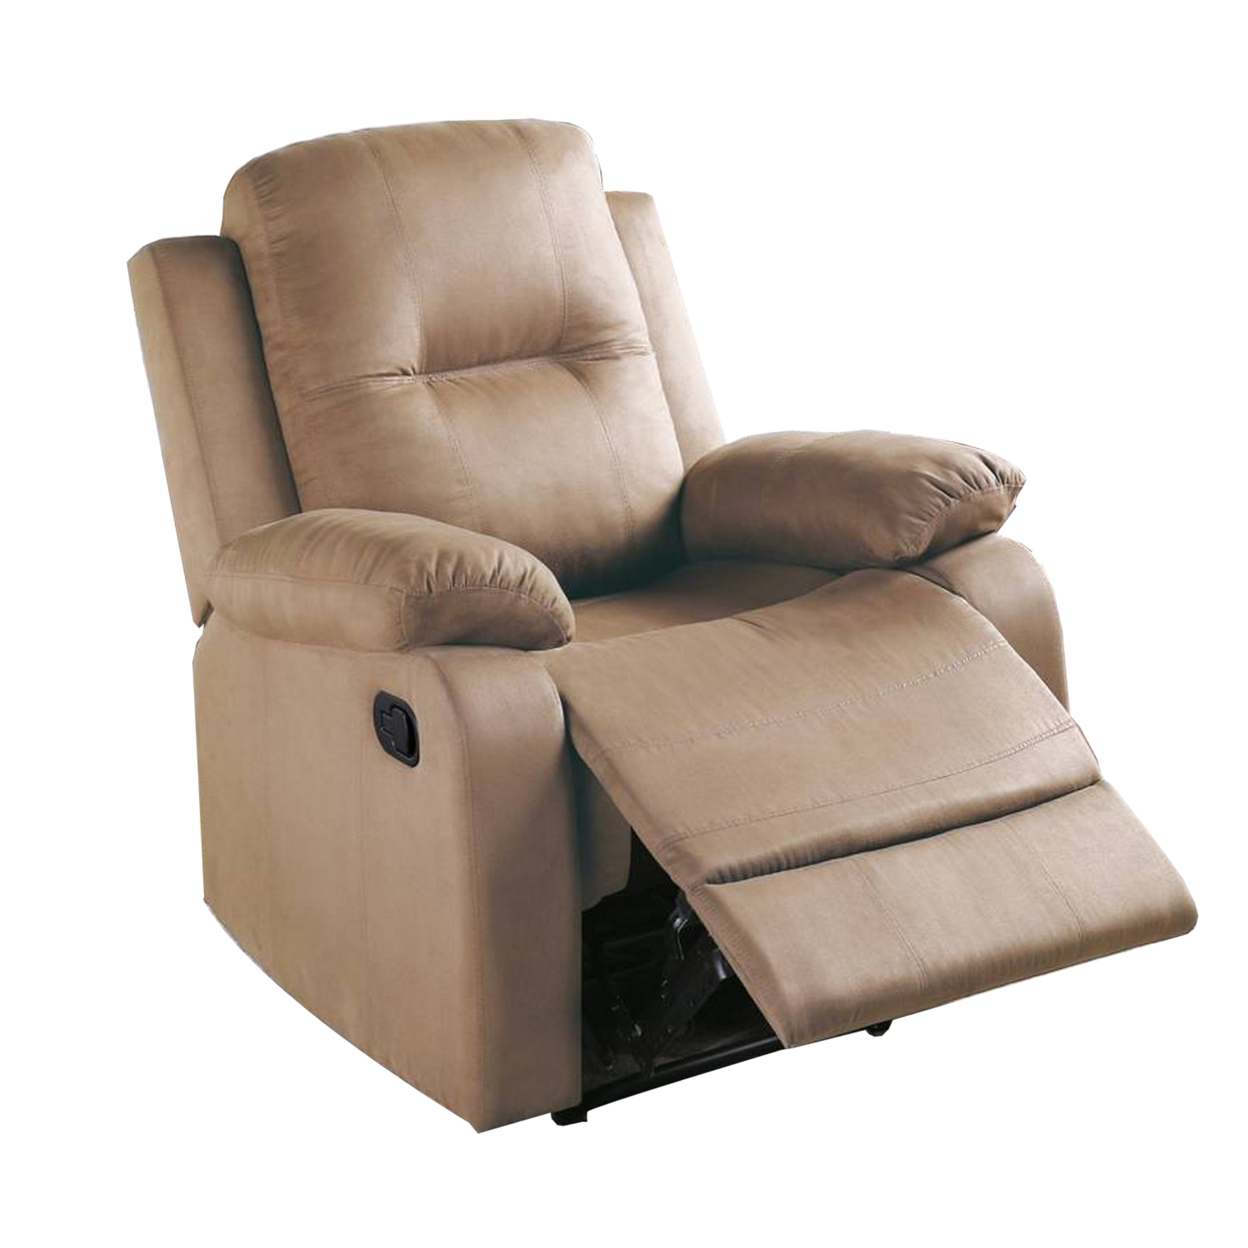 Fabric Upholstered Recliner With Tufted Back, Beige- Saltoro Sherpi